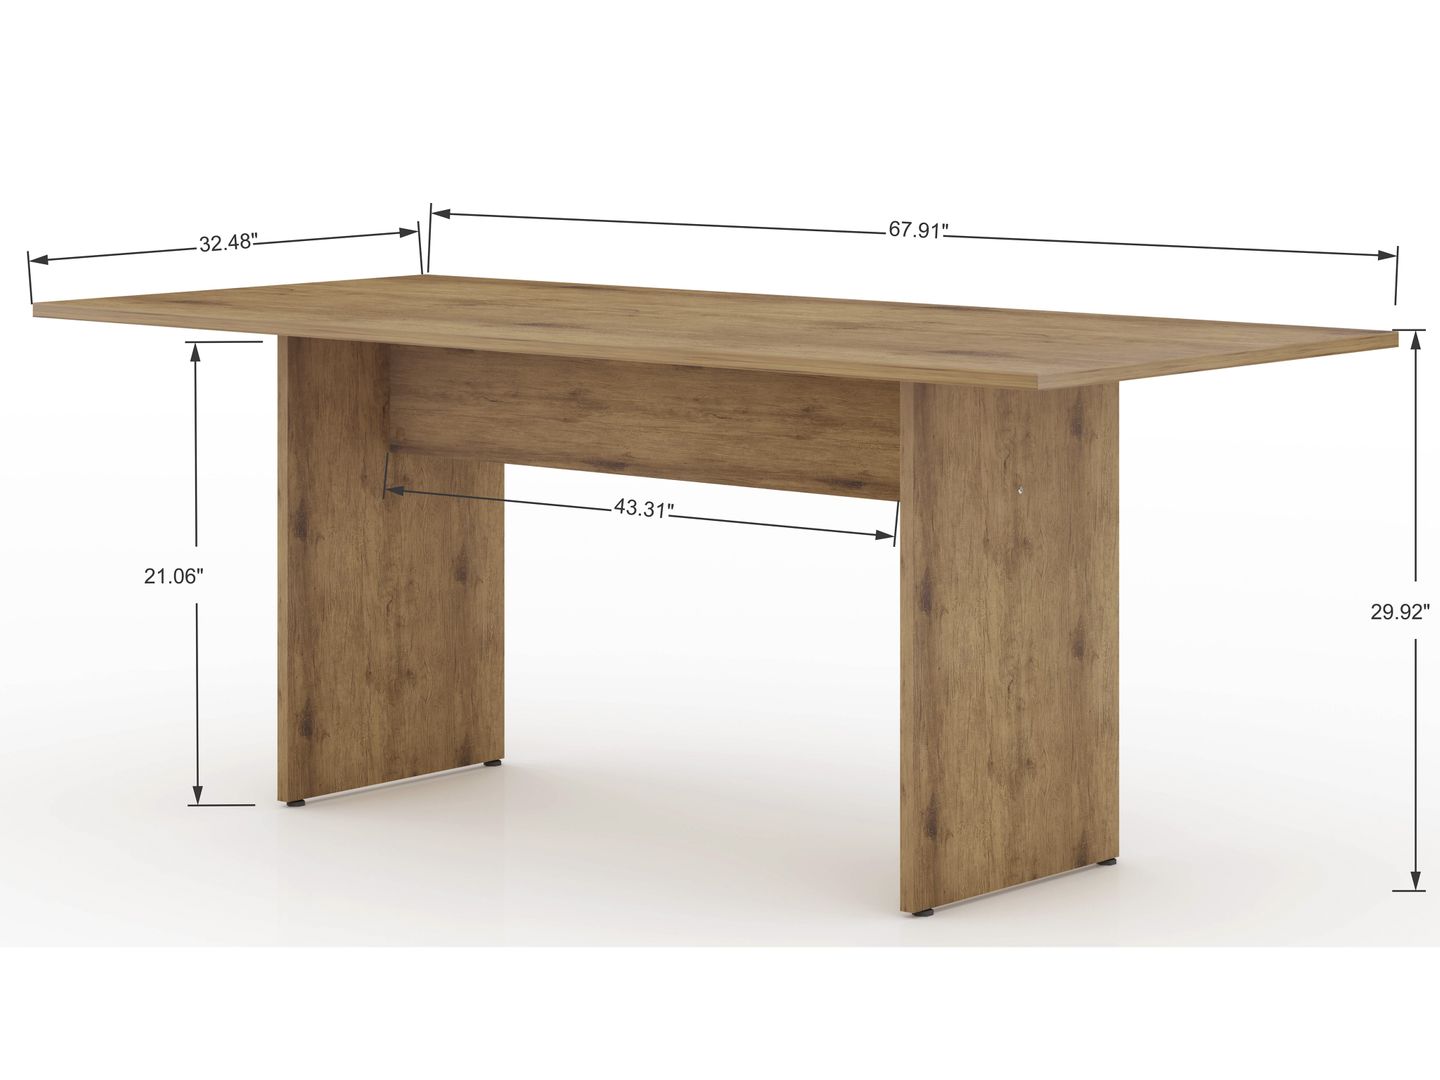 Manhattan Comfort NoMad 67.91 Rustic Country Dining Table in Nature